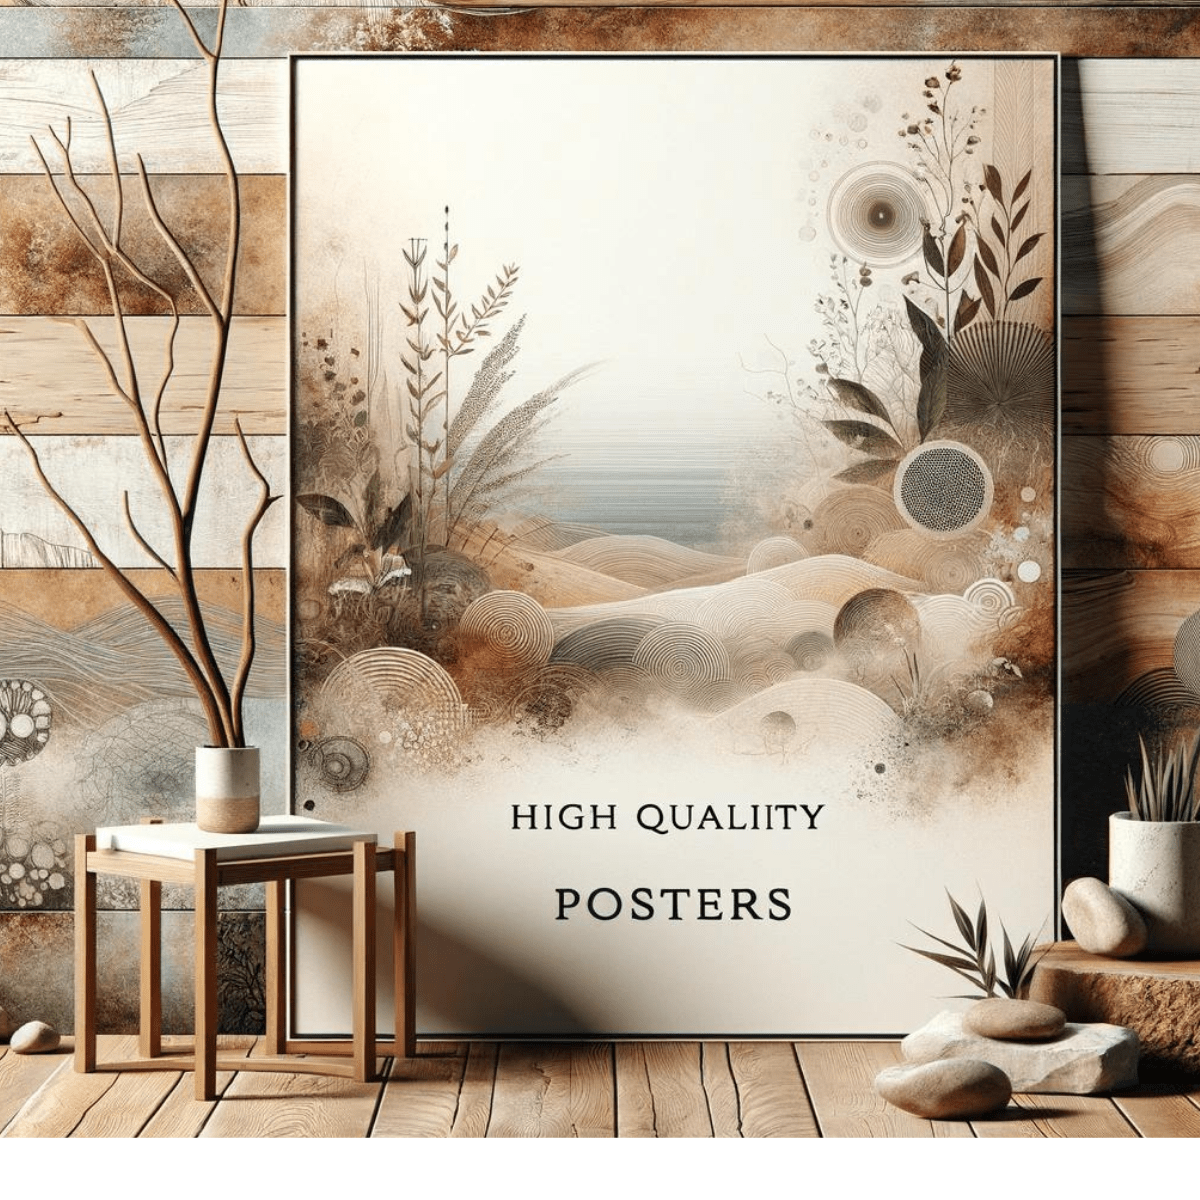 High Quality Posters - motif